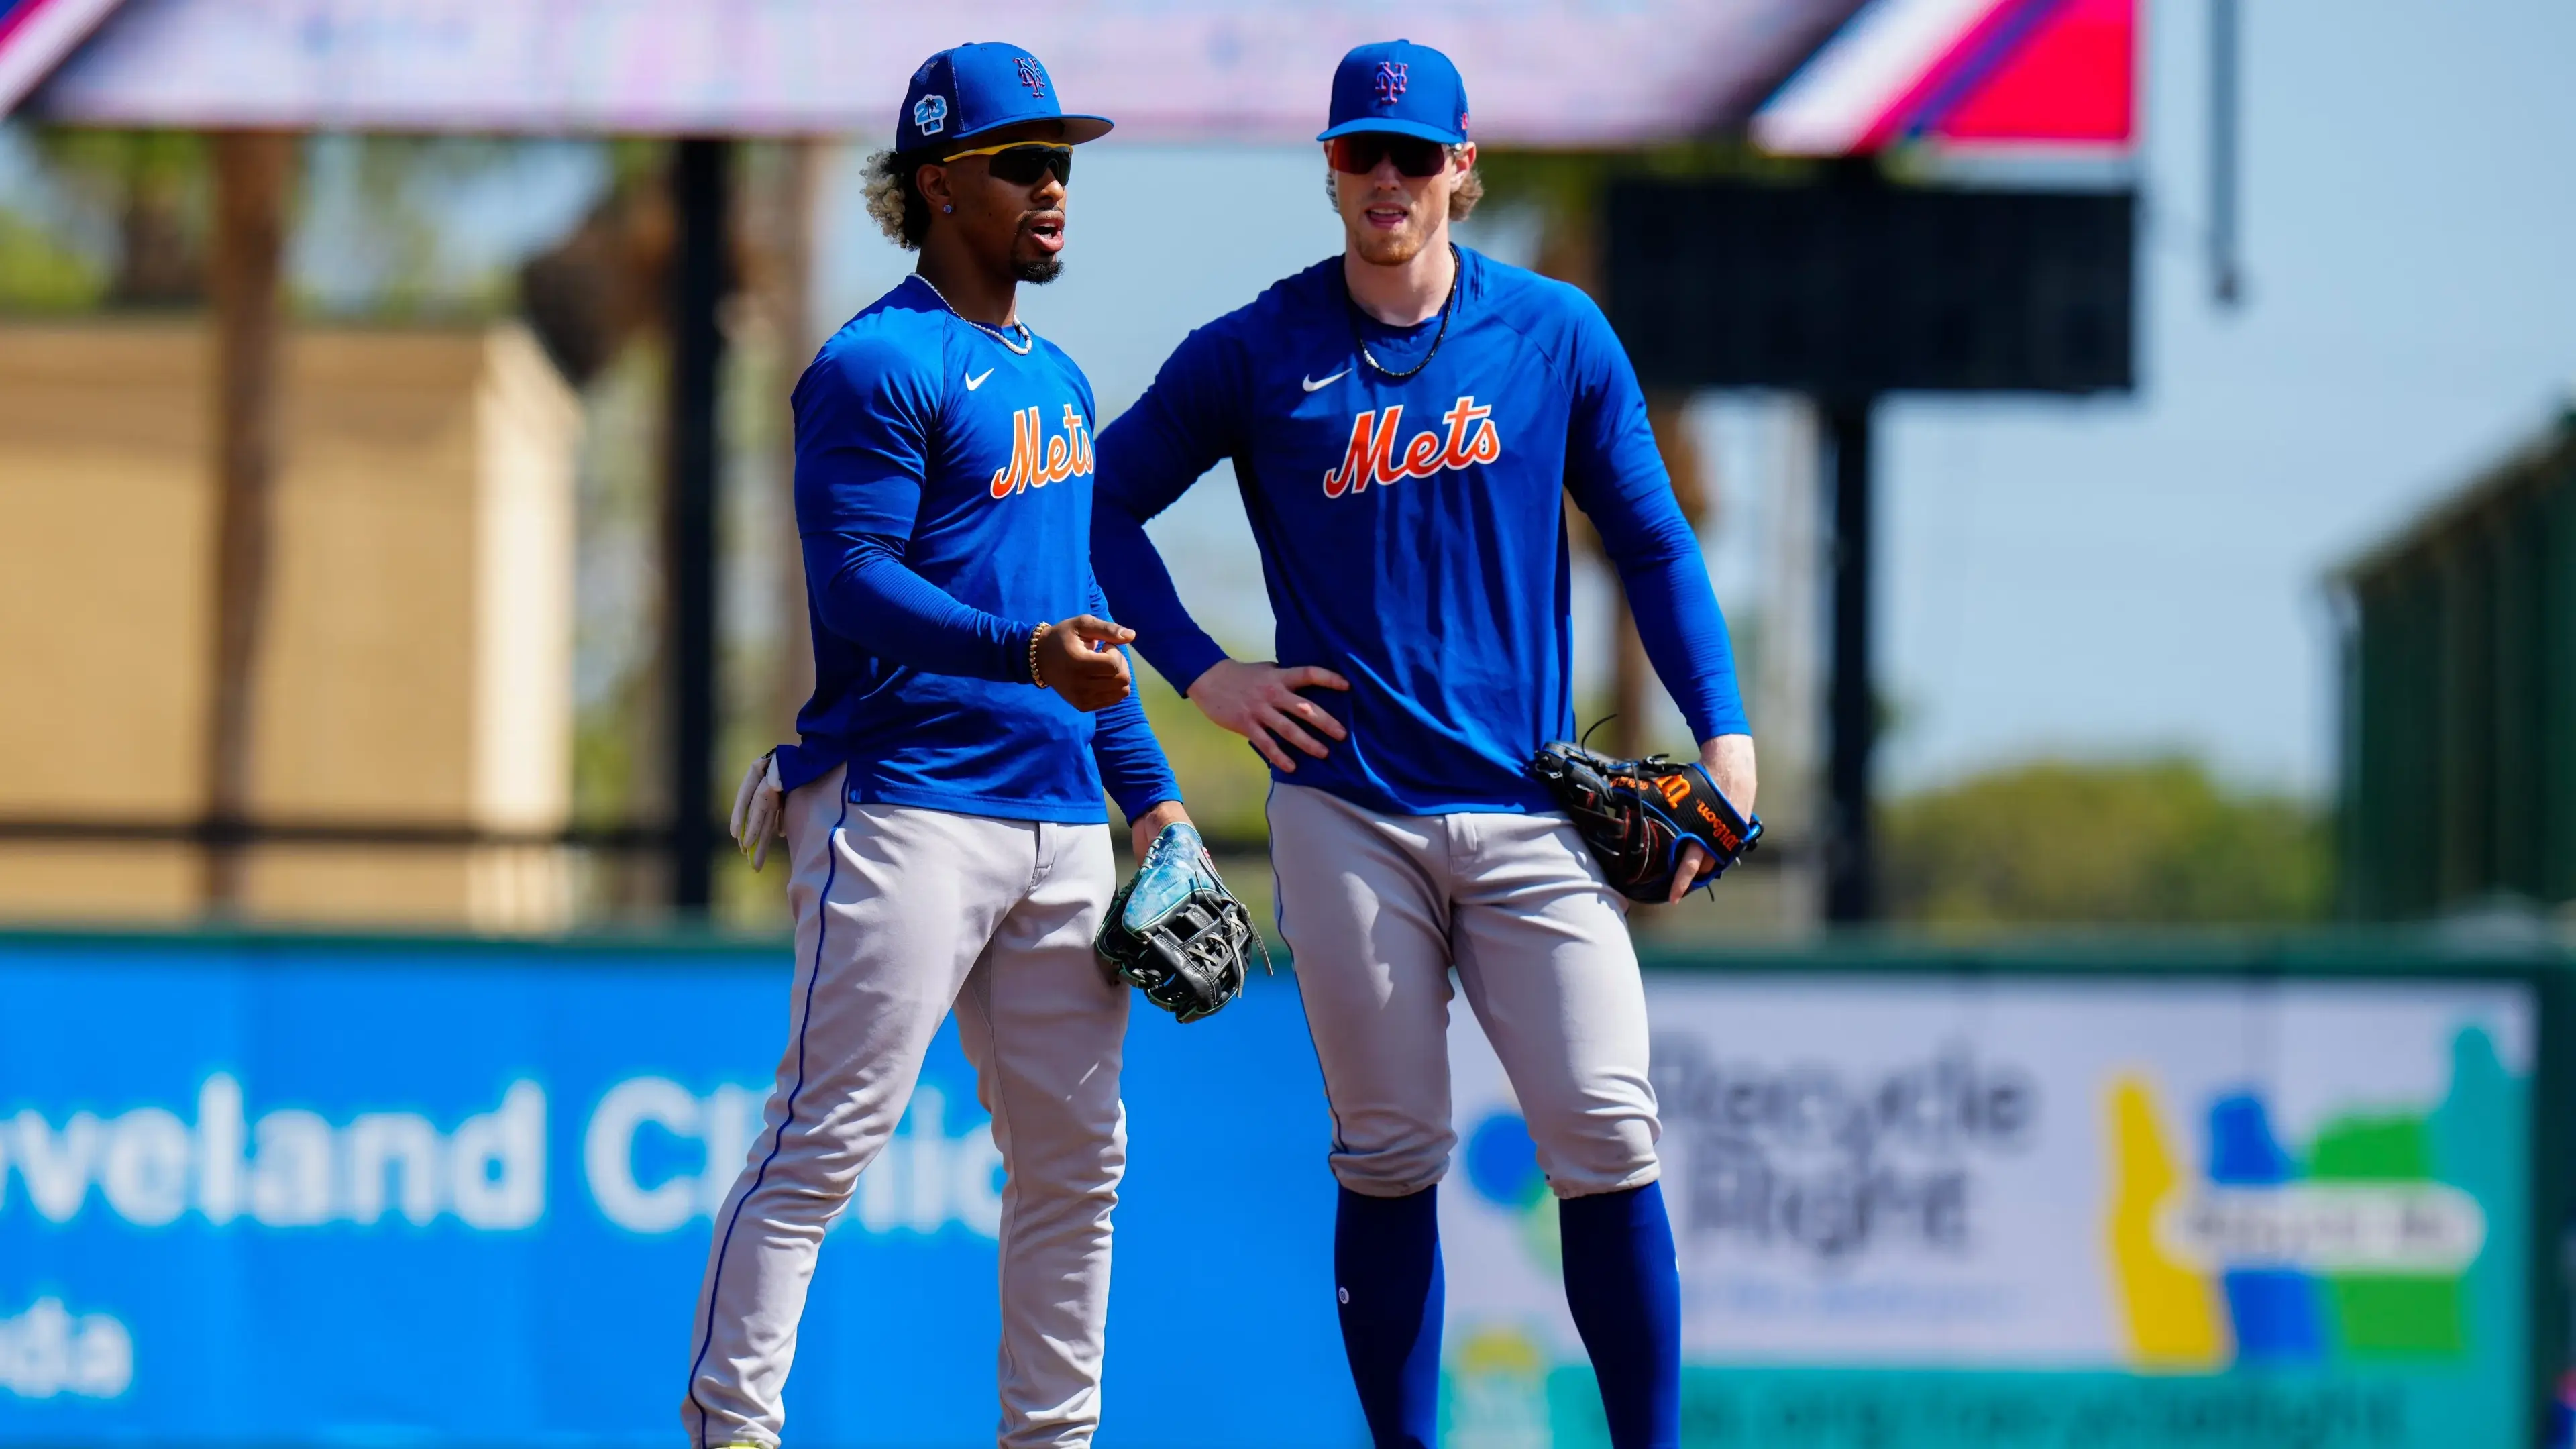 Feb 27, 2023; Jupiter, Florida, USA; New York Mets shortstop Francisco Lindor (12) and third baseman Brett Baty (22) warm up prior to a game against the St. Louis Cardinals at Roger Dean Stadium. / Rich Storry-USA TODAY Sports